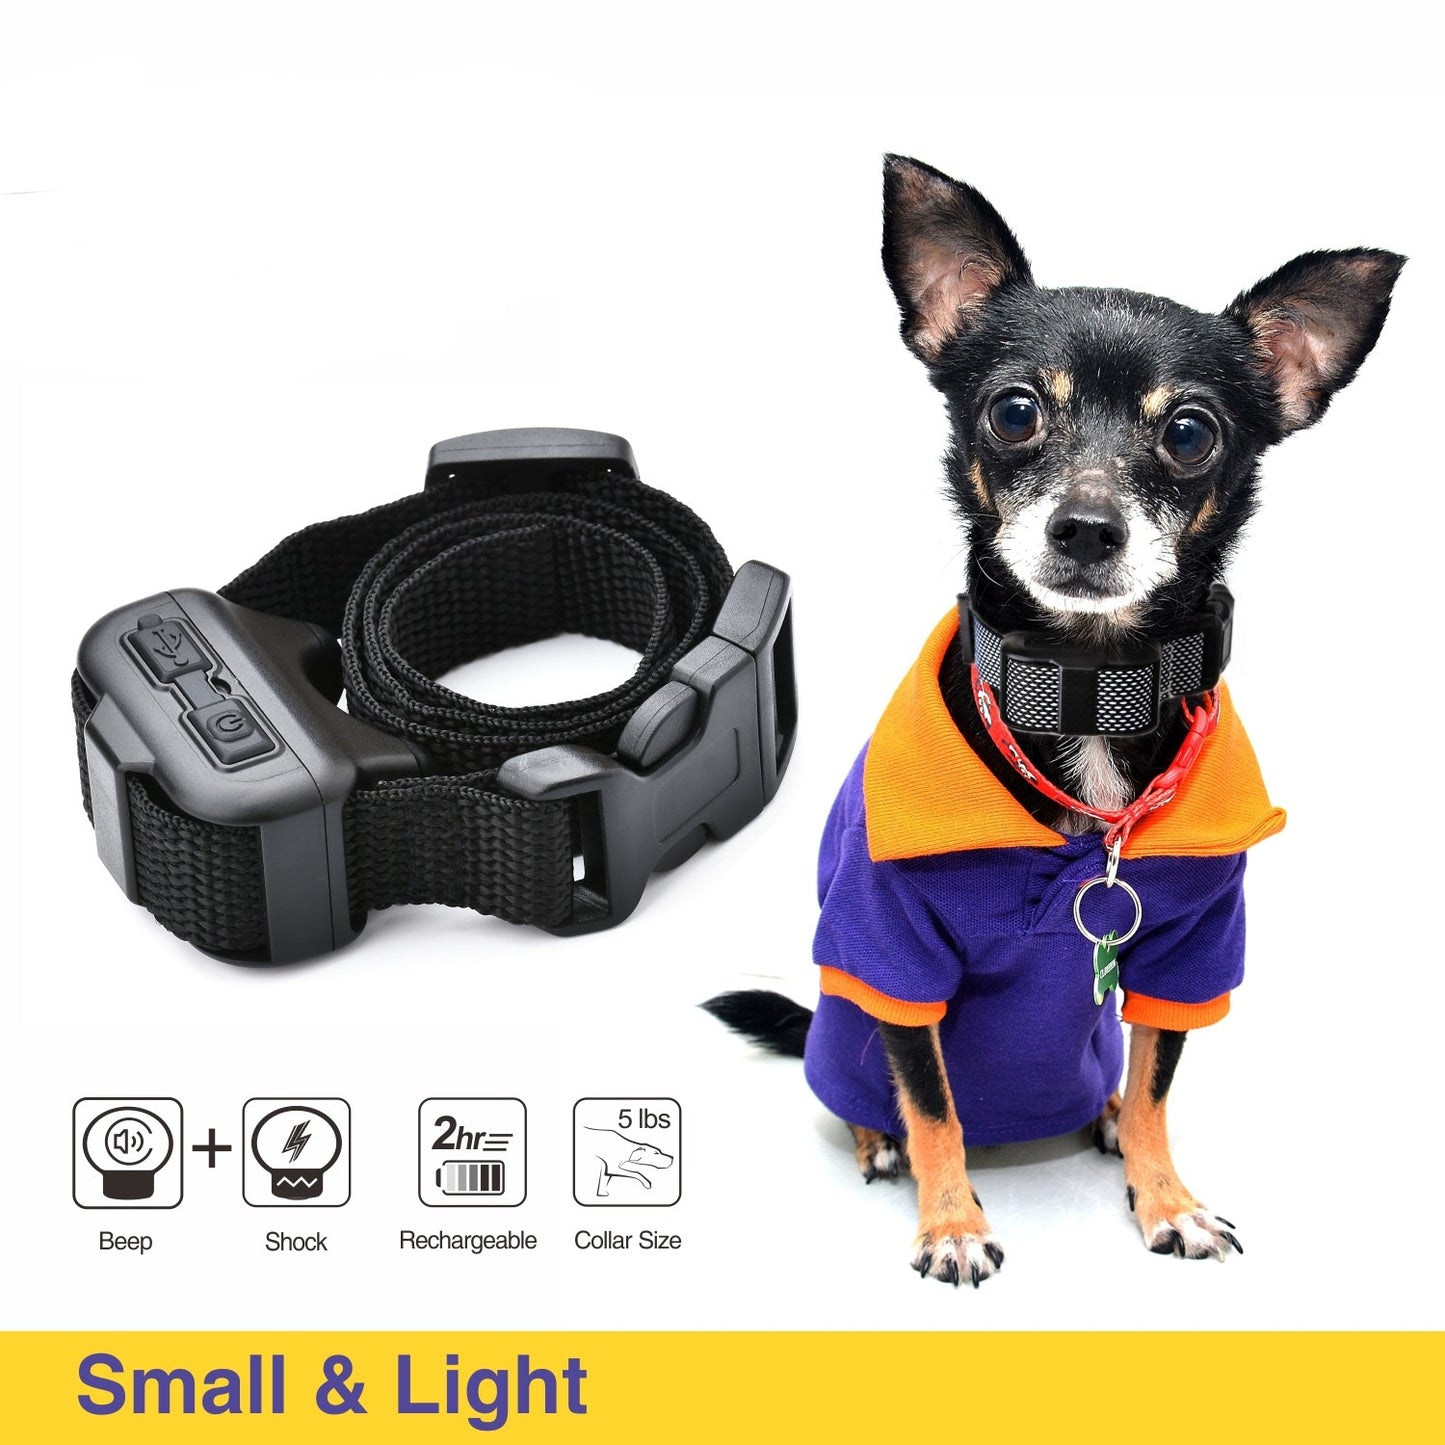 Automatic Barking Stop For Small Dogs